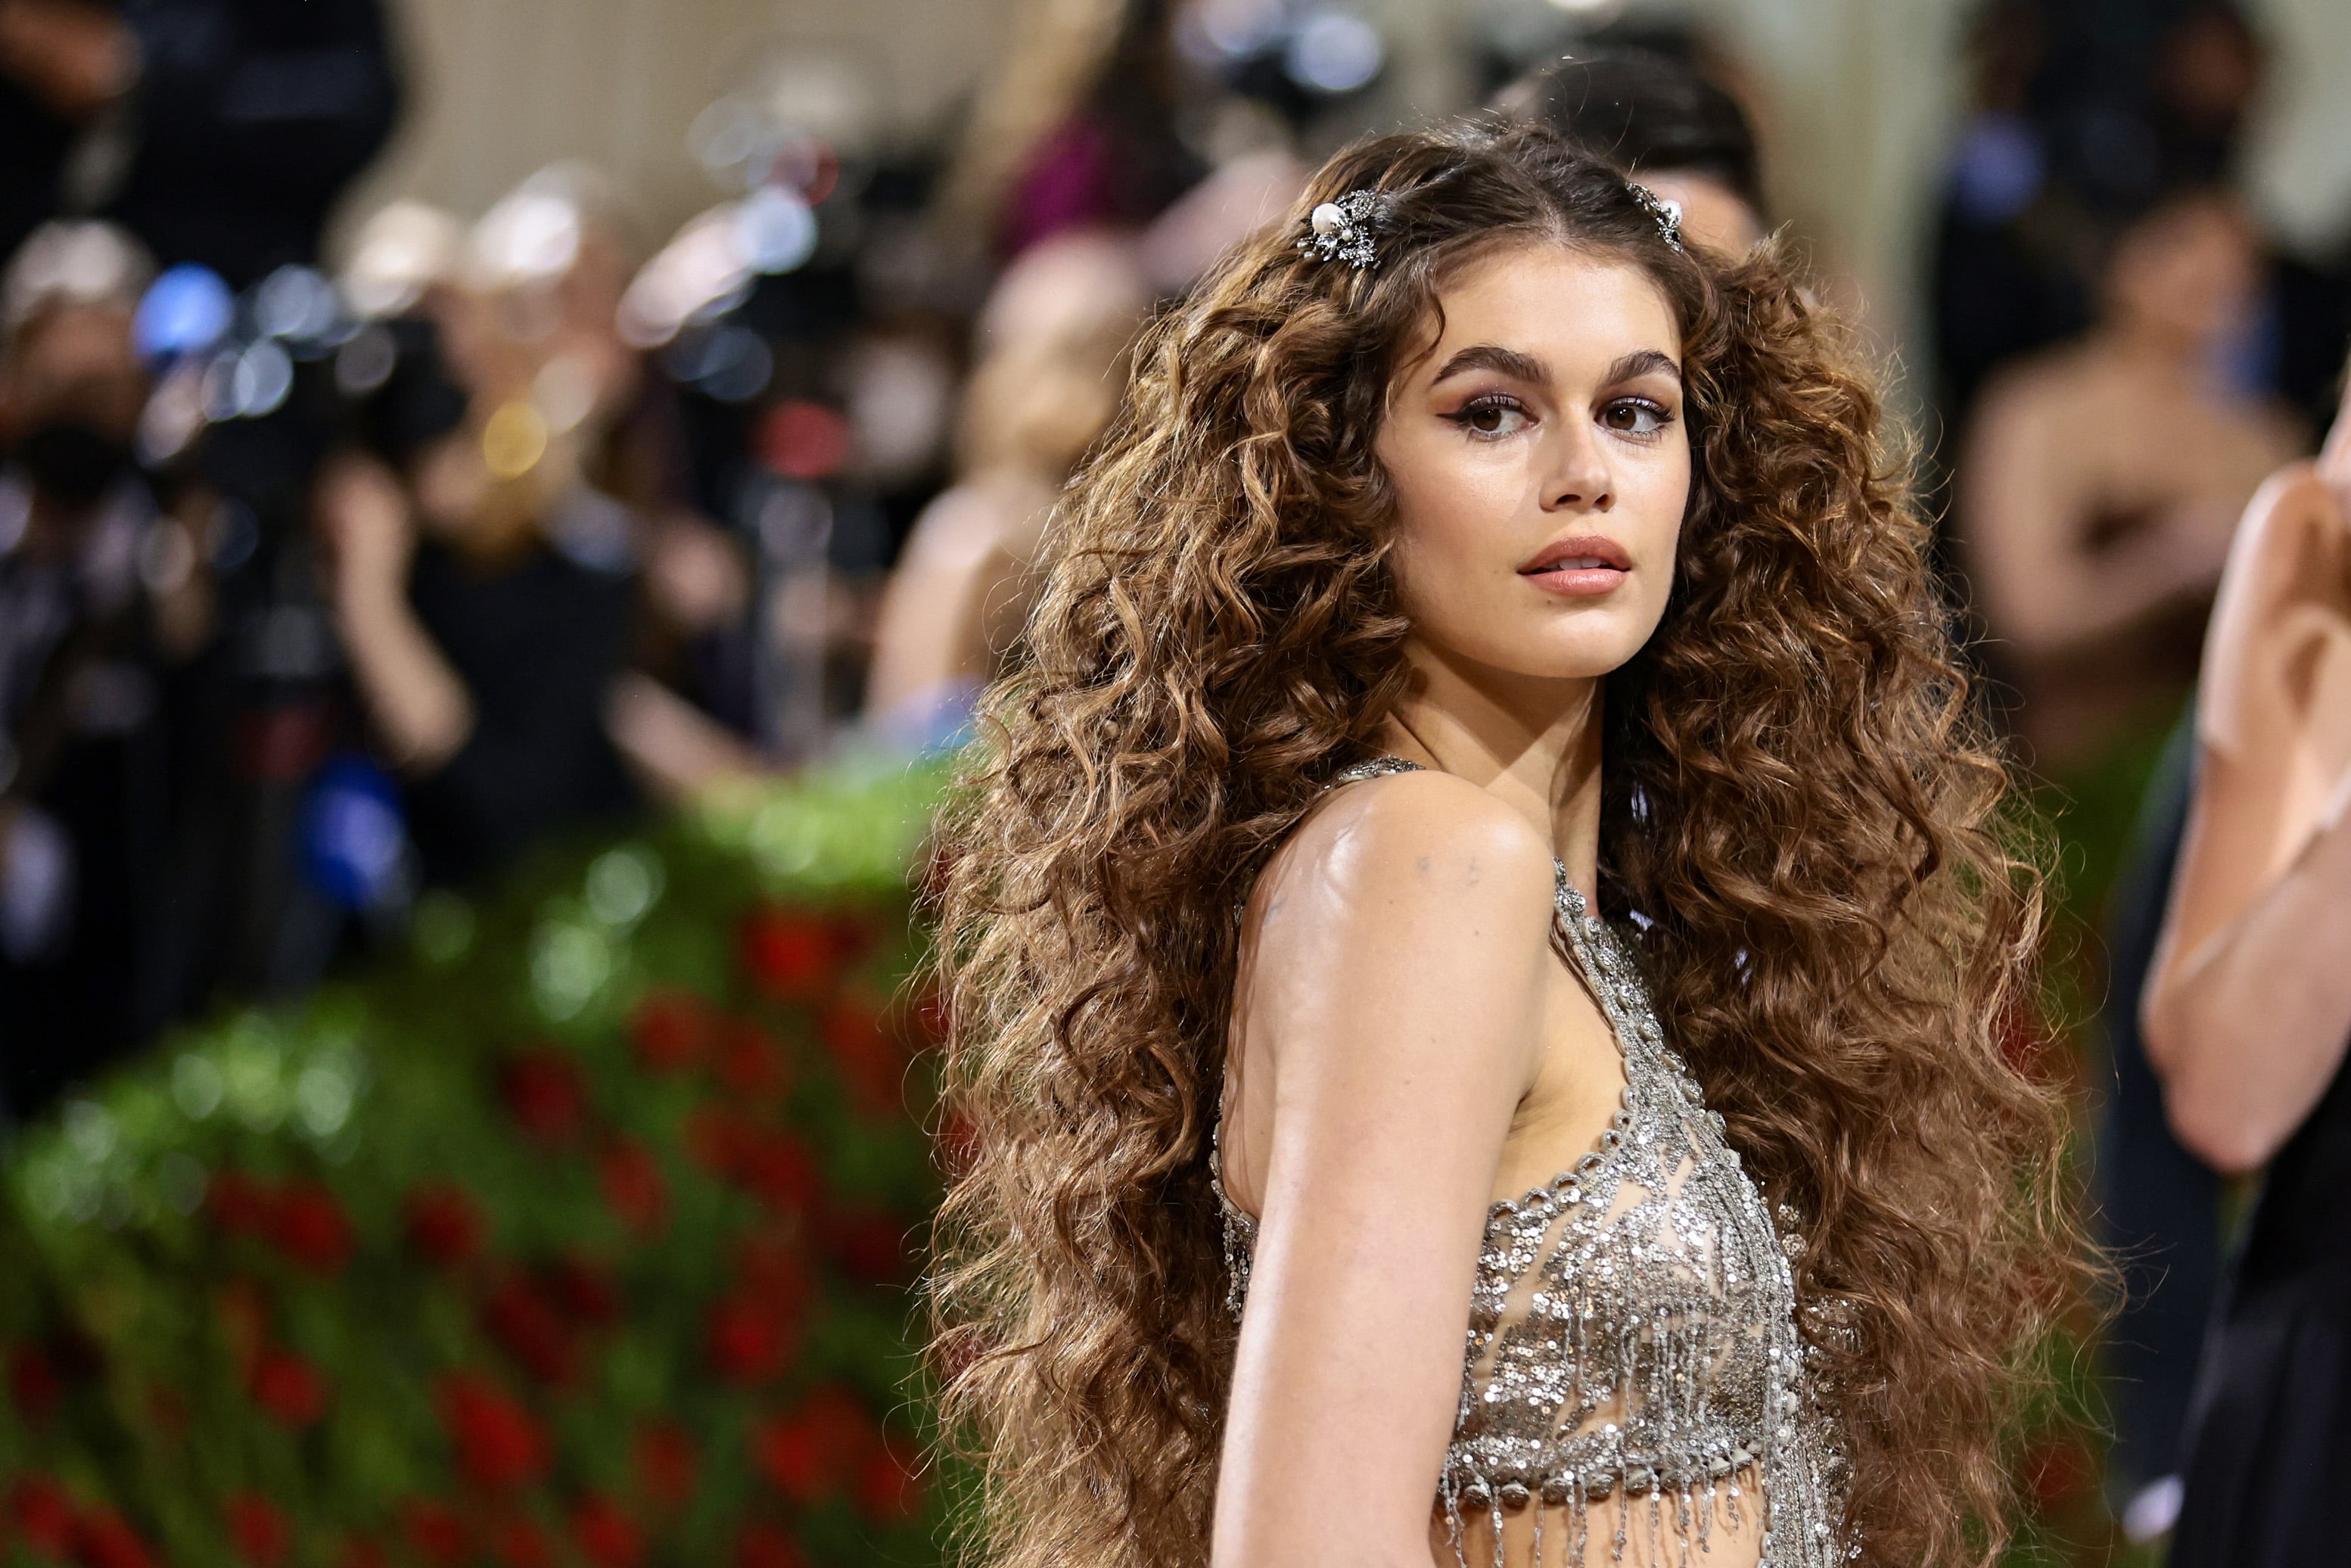 Met Gala 2022: Best Hair, Makeup, and Nails From the Red Carpet